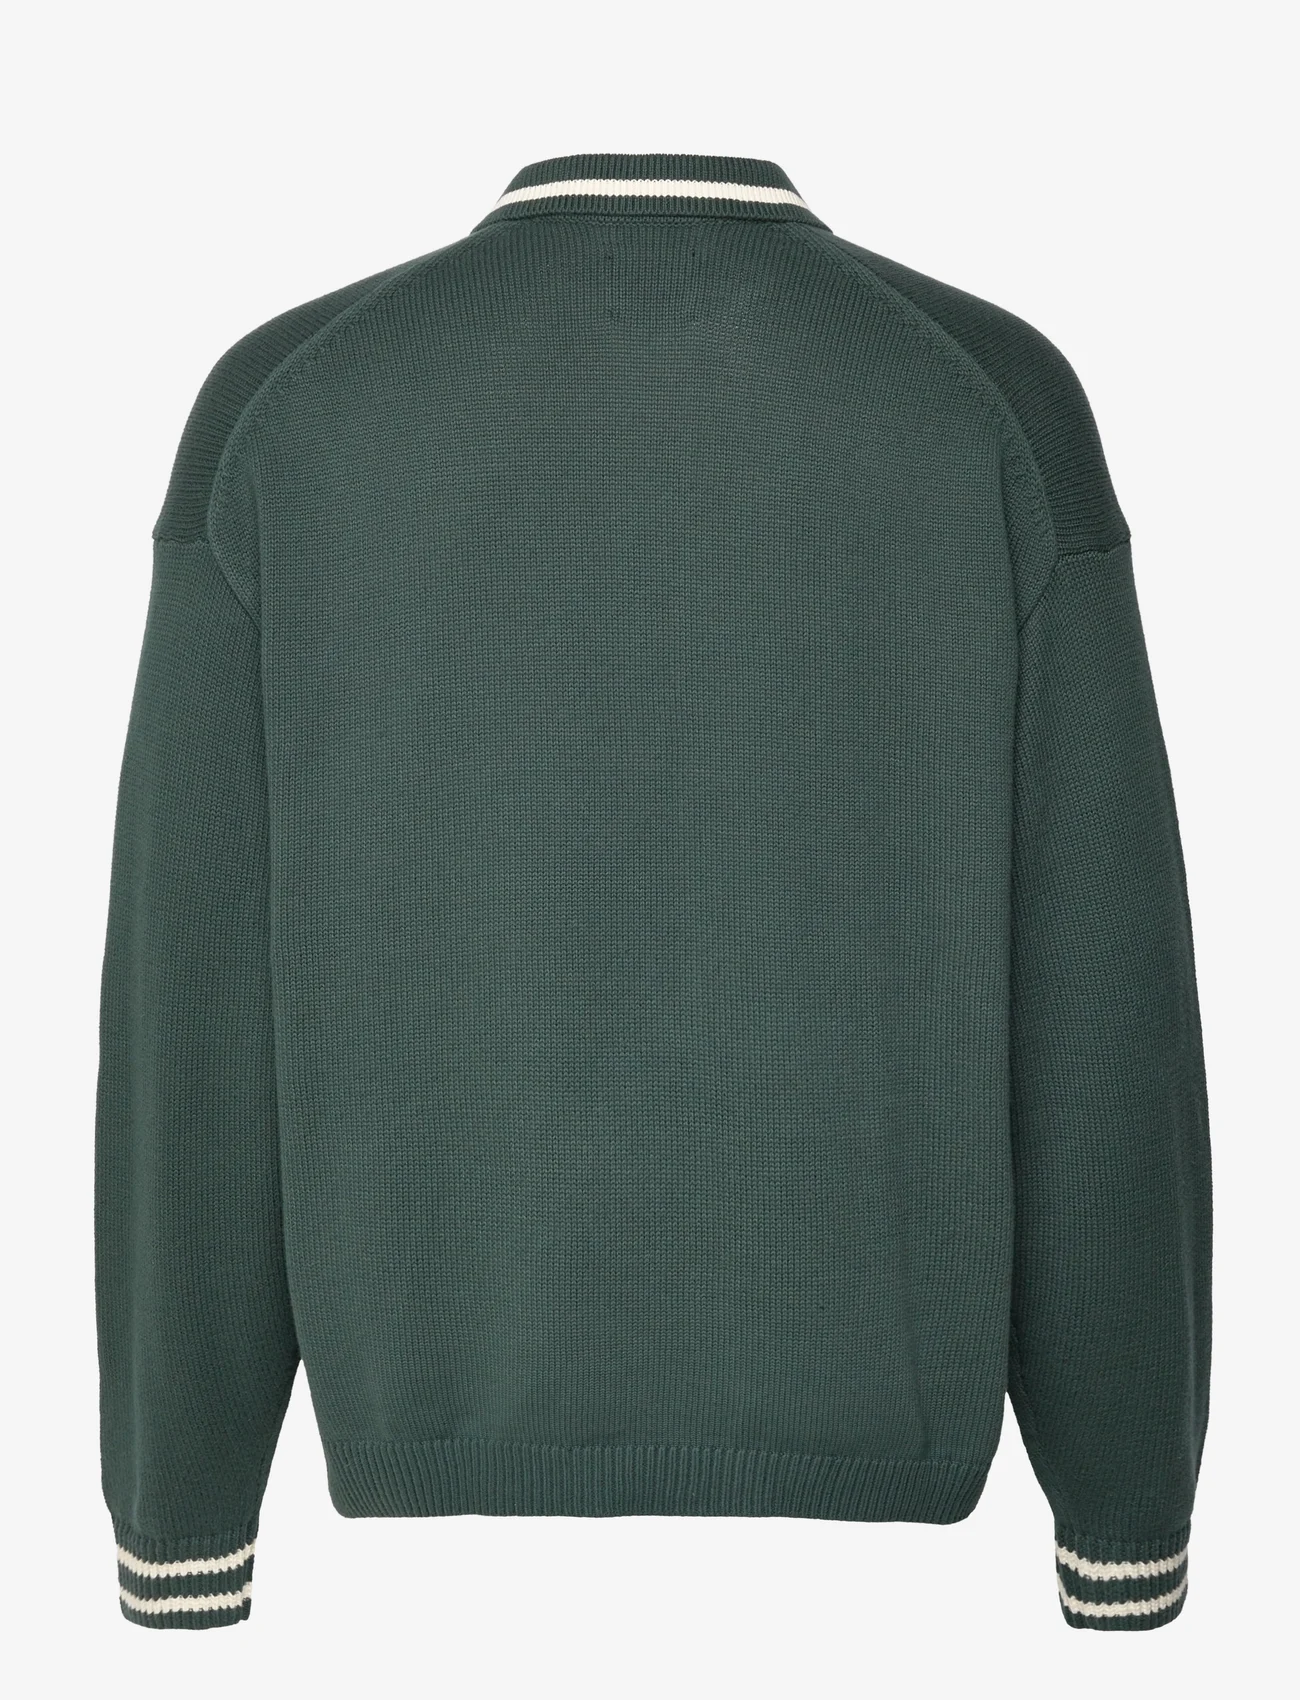 Abercrombie & Fitch - ANF MENS SWEATERS - langermede - green - 1